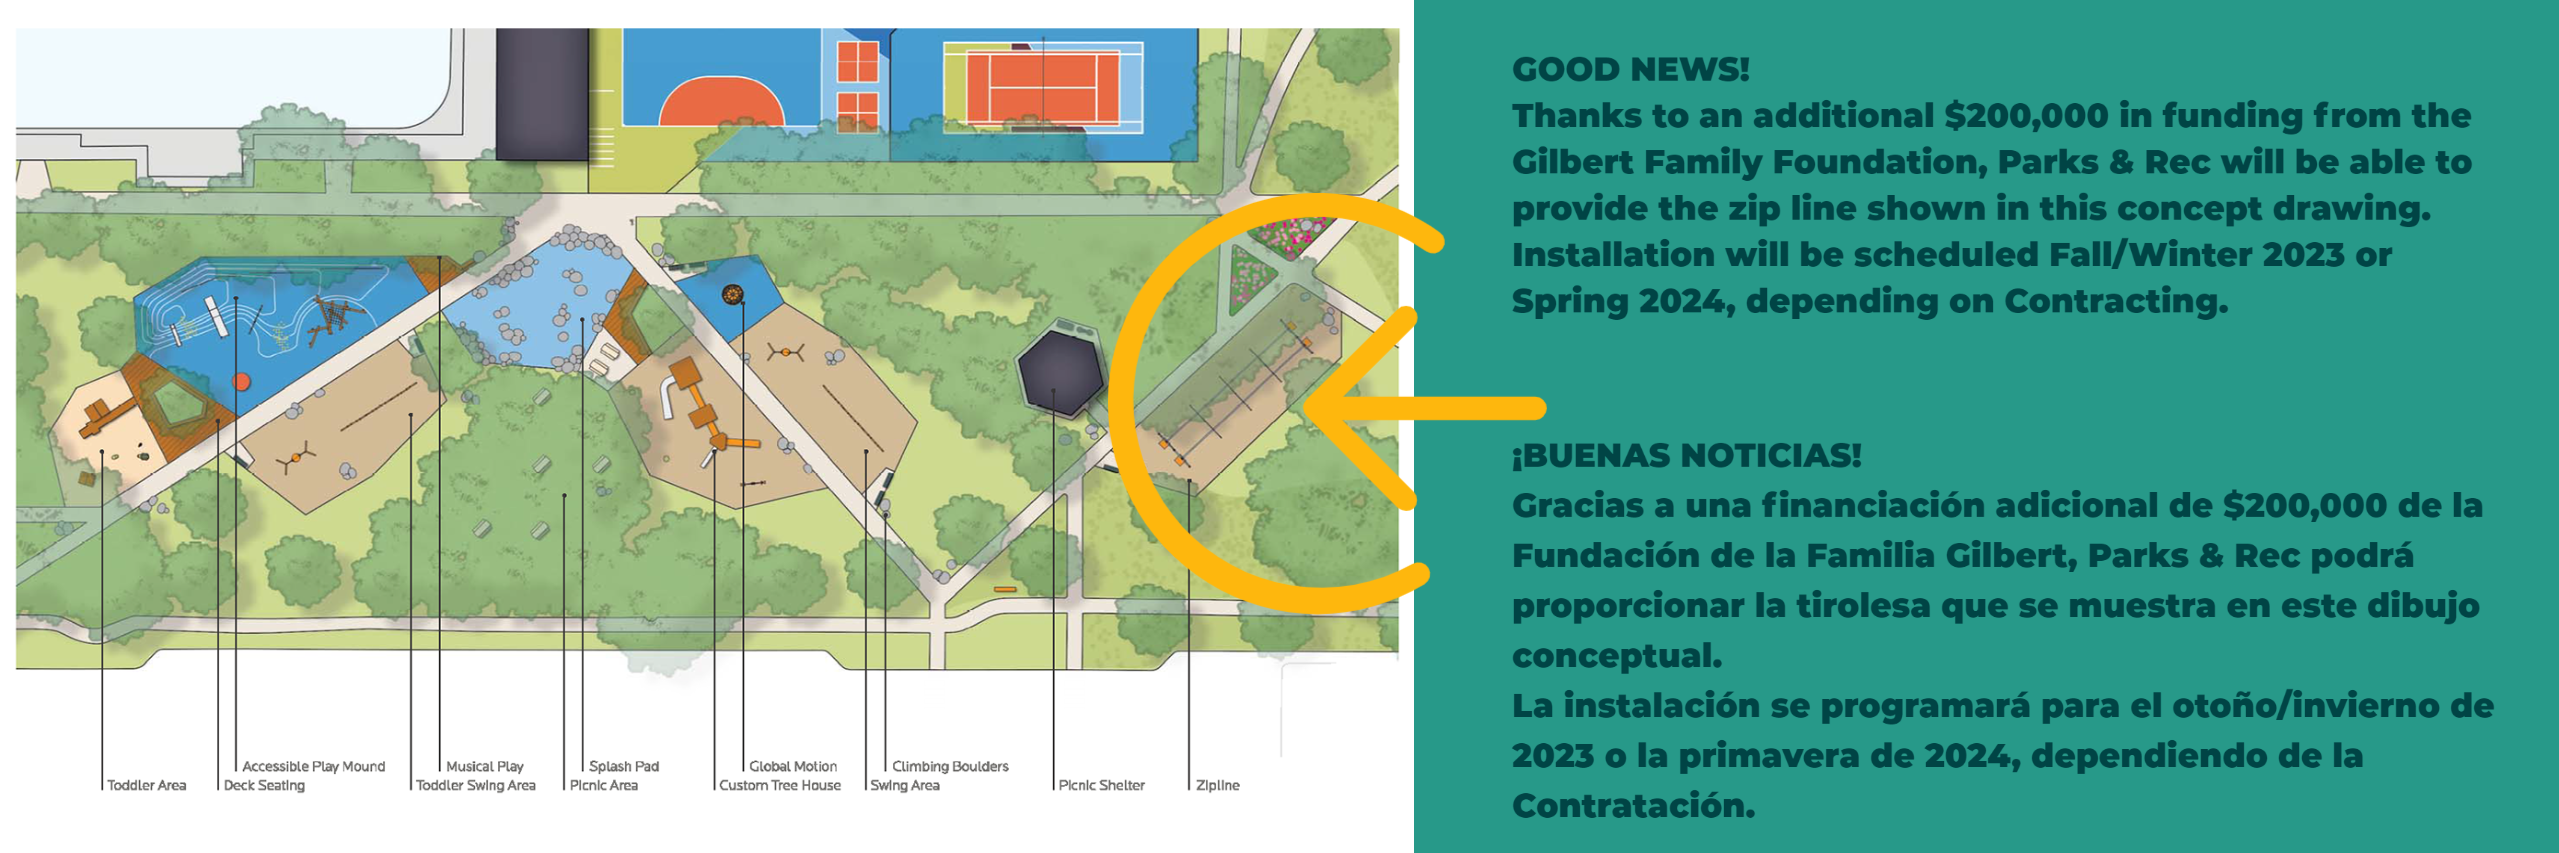 Update on GFF funding at Clark Park